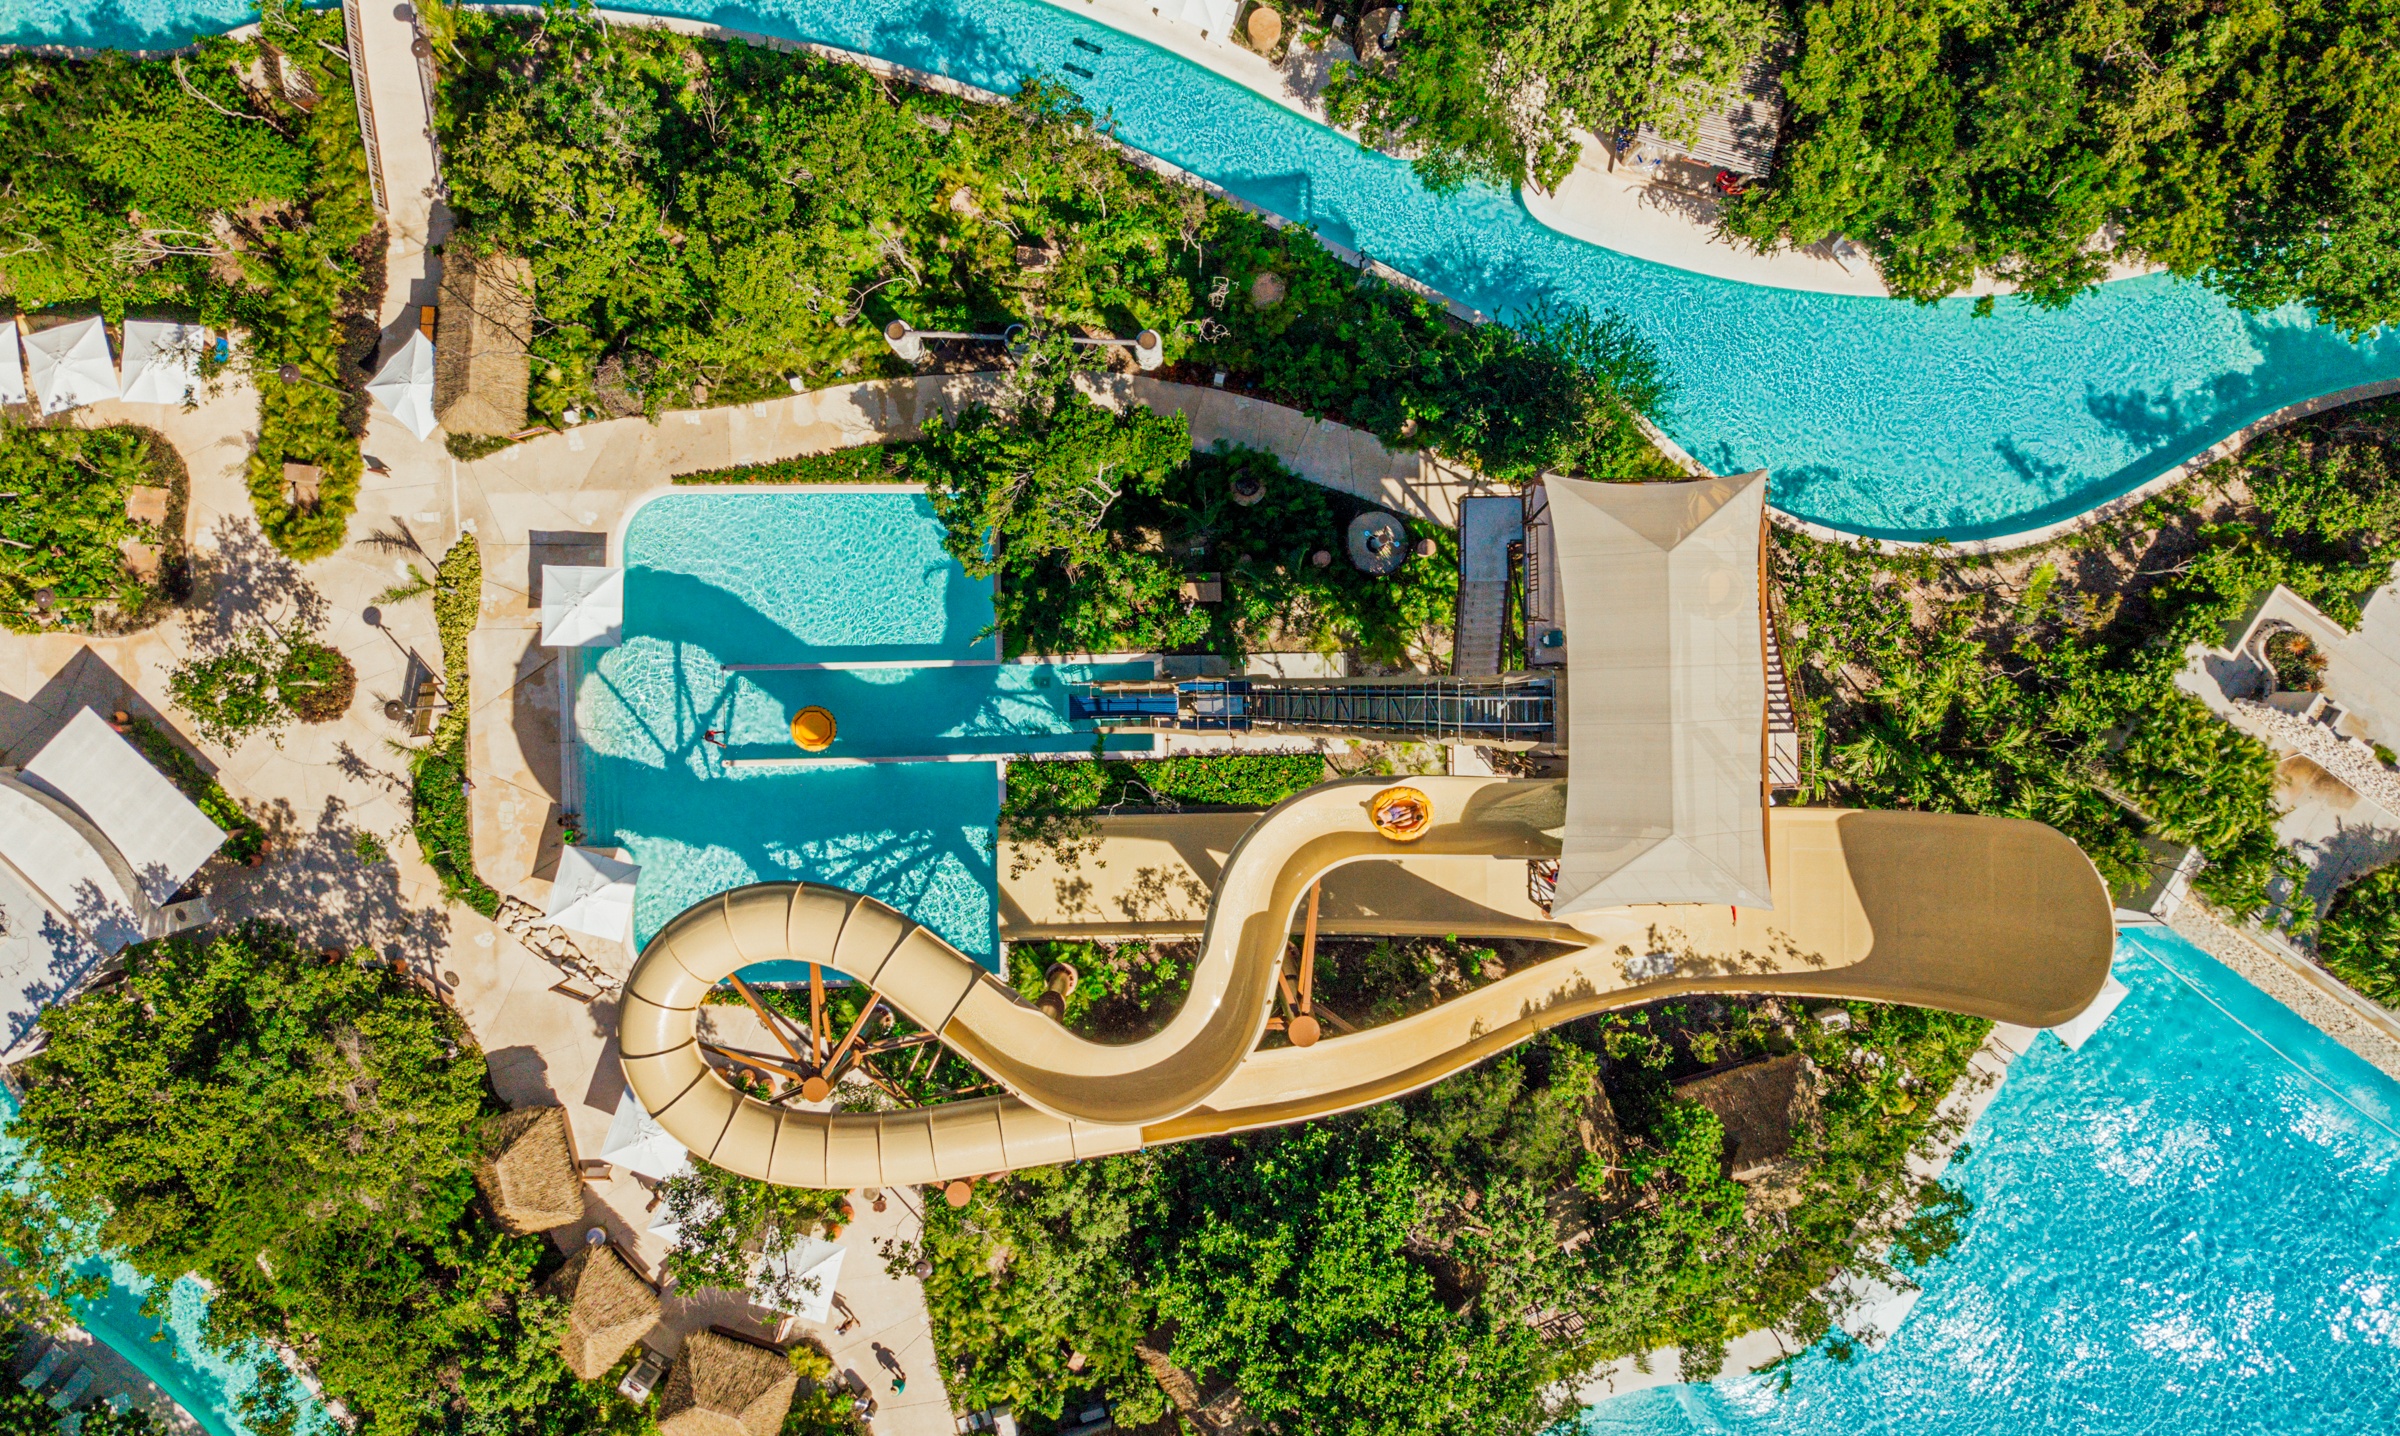 water slide and tower in lush green from bird's eye view